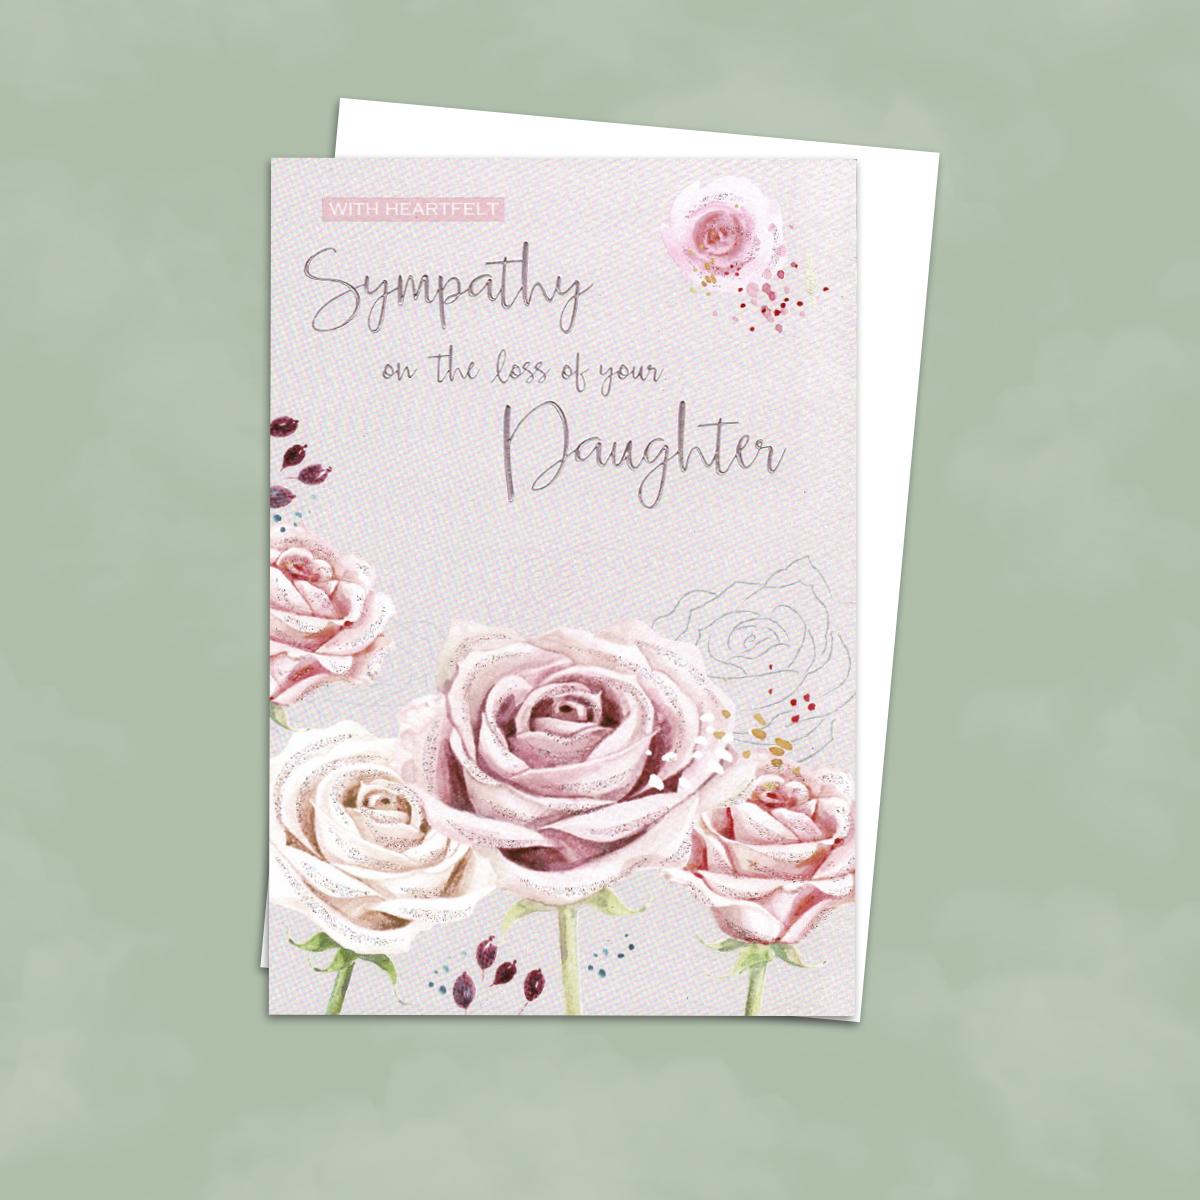 Loss Of Daughter Sympathy Card Alongside Its White Envelope